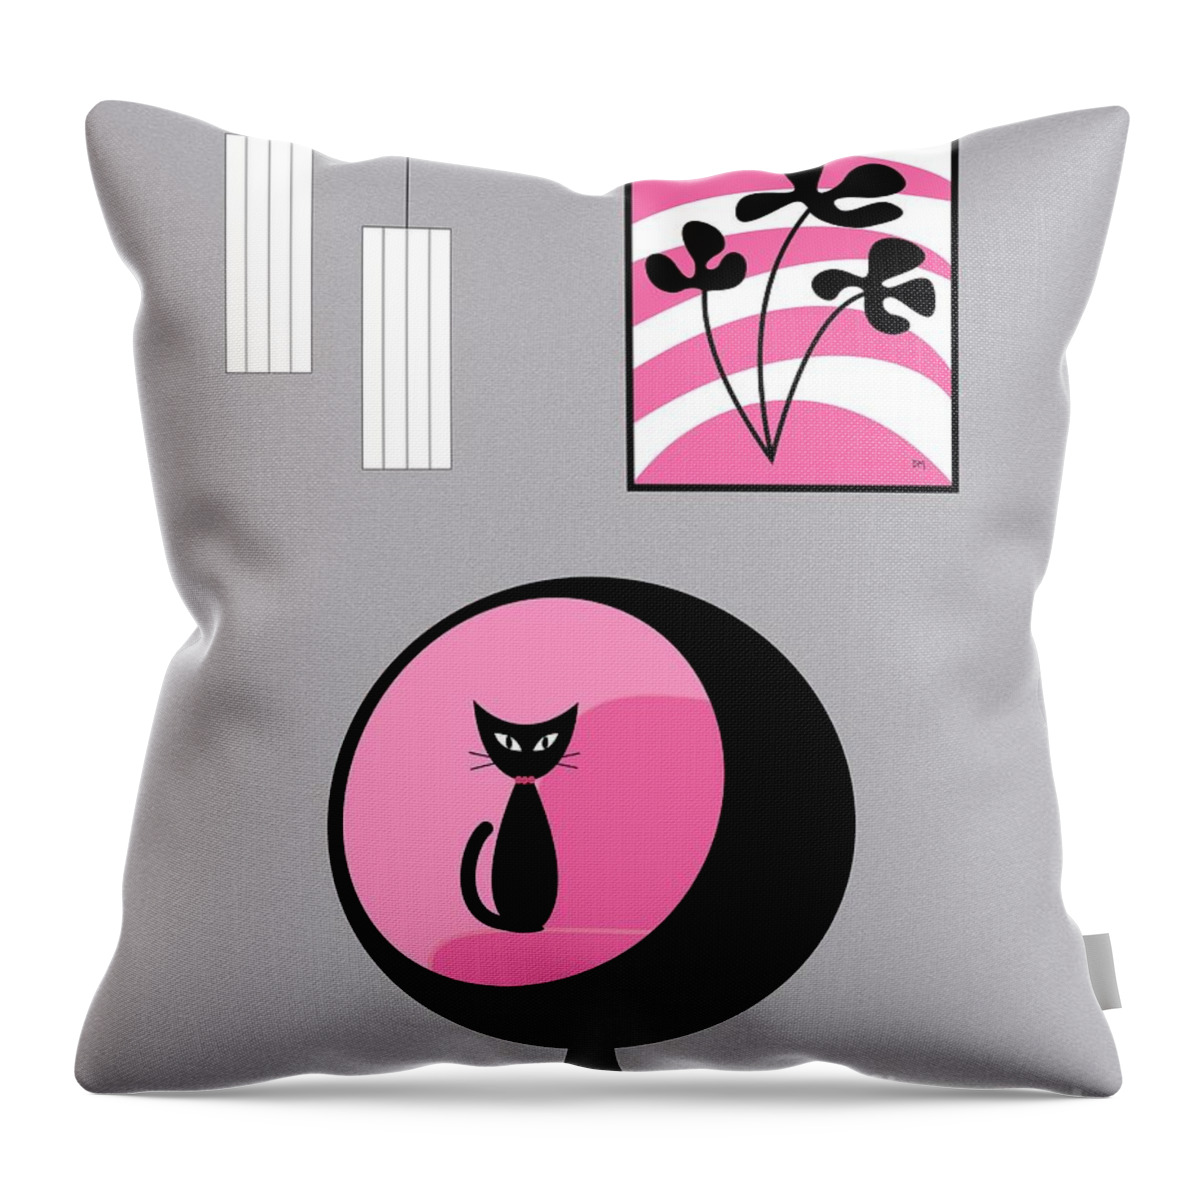 Pink Throw Pillow featuring the digital art Pink 3 on Gray by Donna Mibus